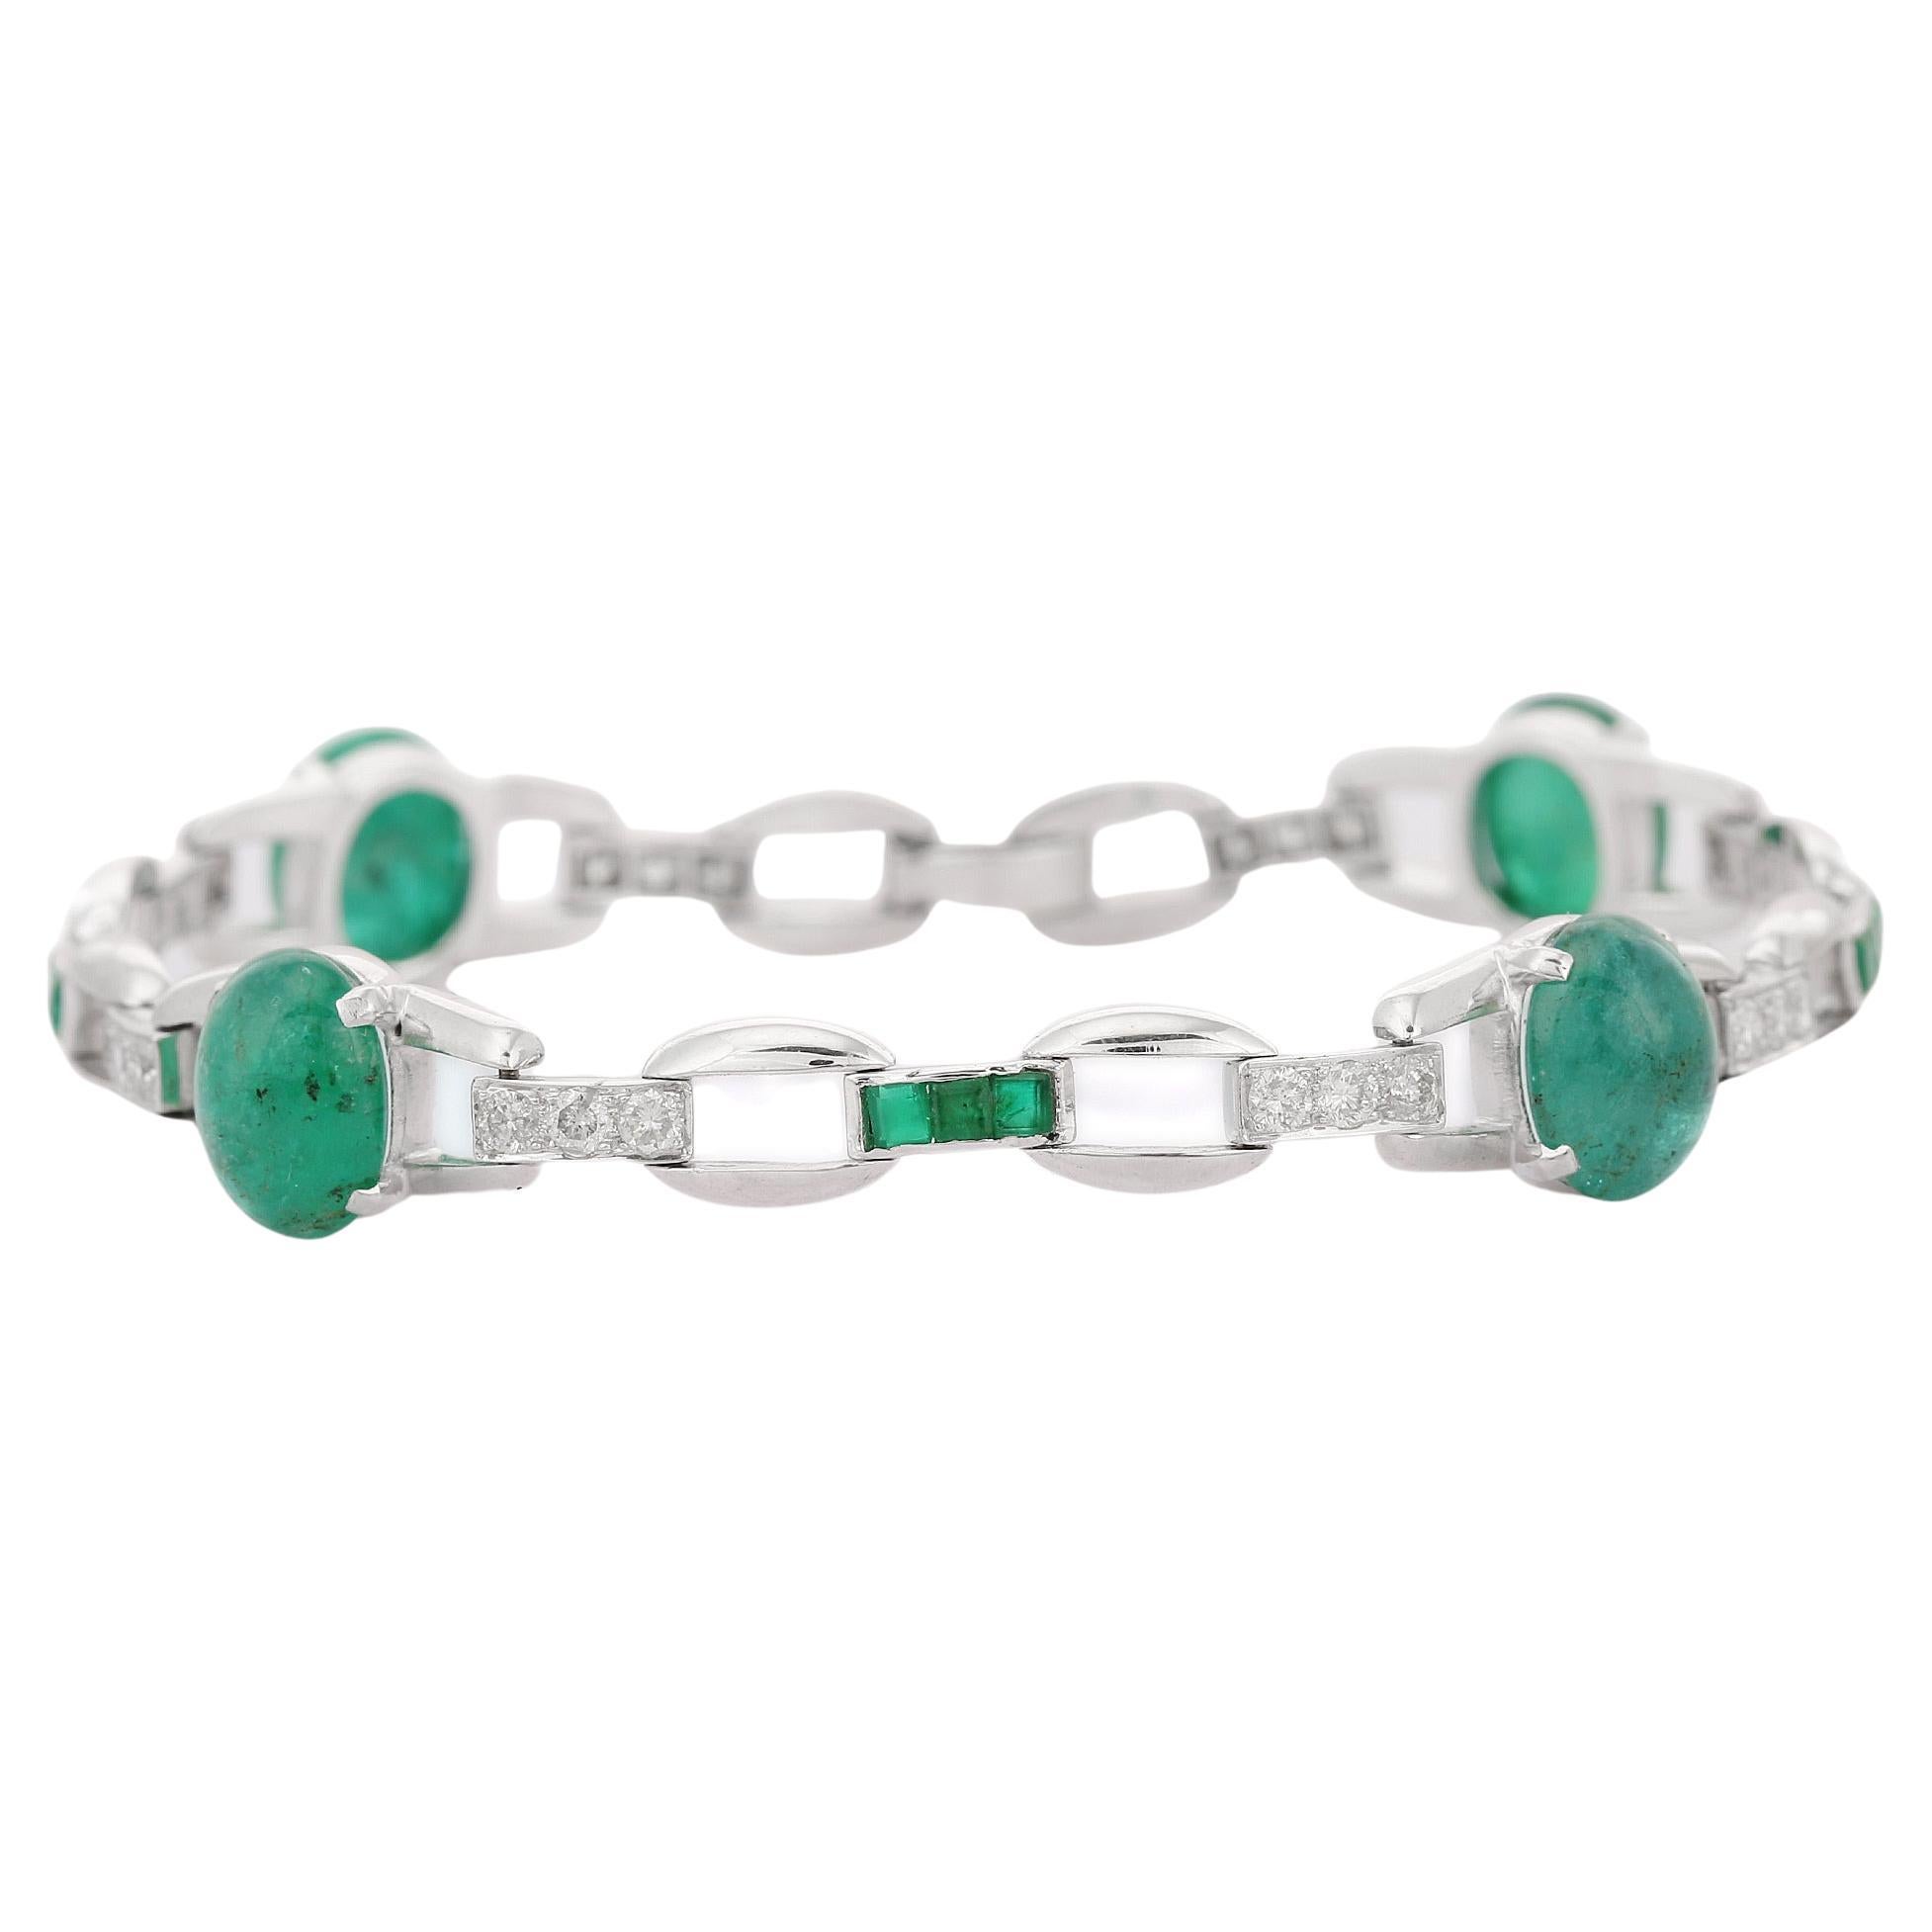 Unique Handcrafted Emerald and Diamond Wedding Bracelet in 18K White Gold 